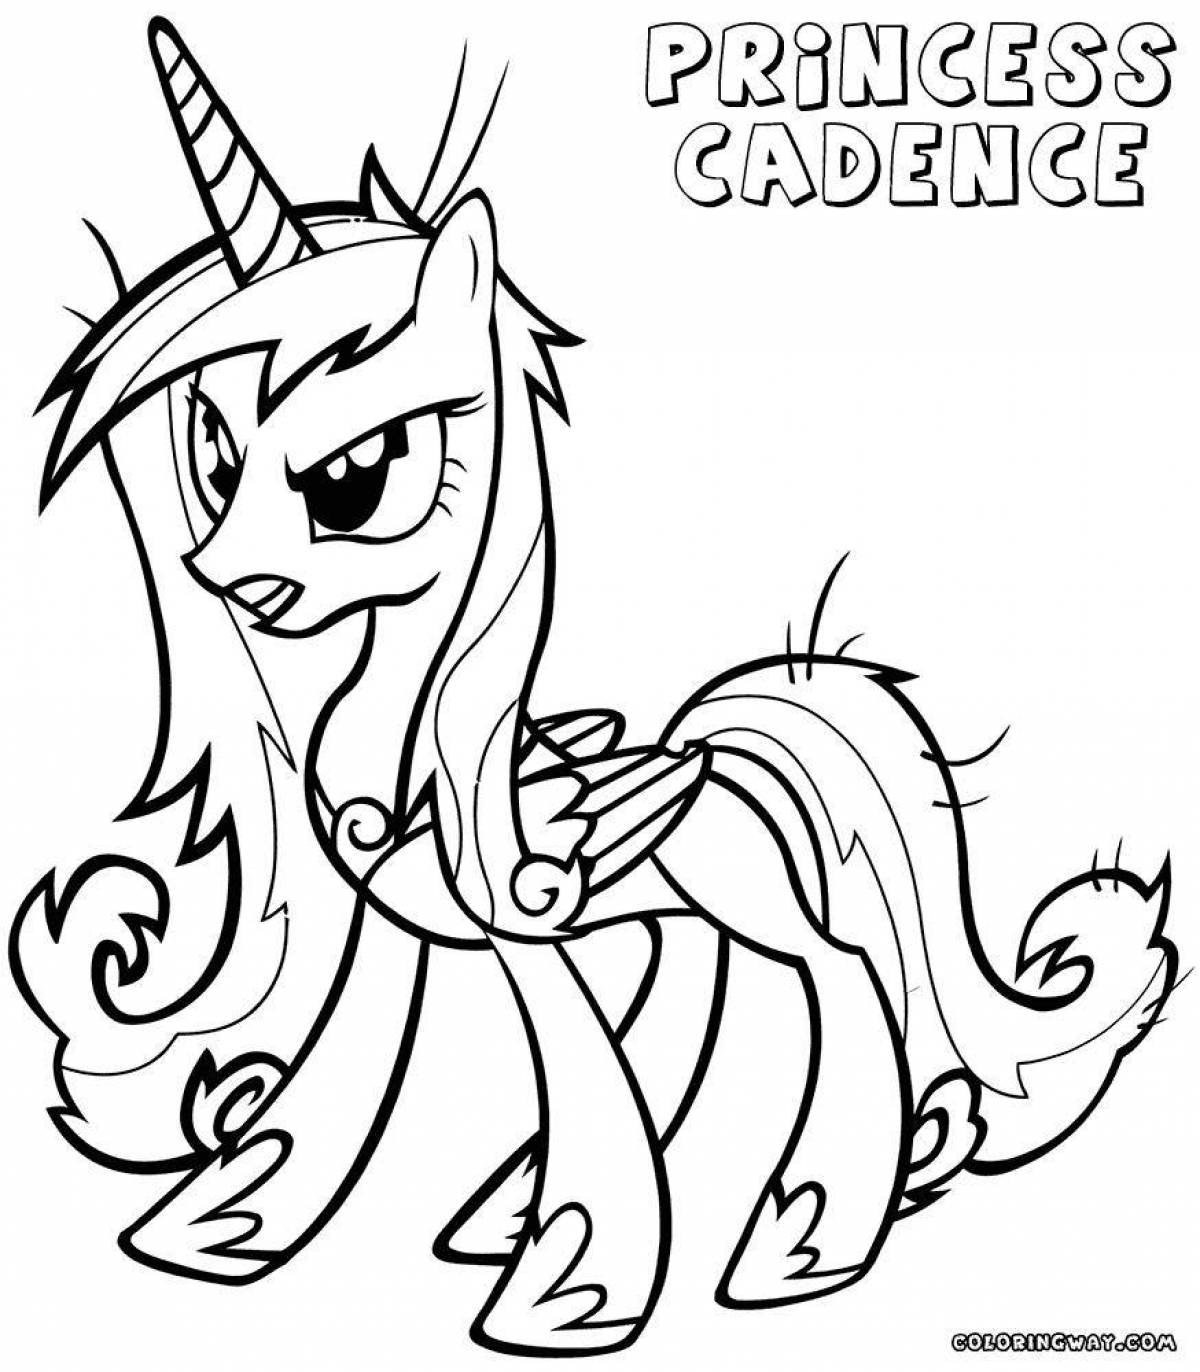 Awesome princess cadence coloring page